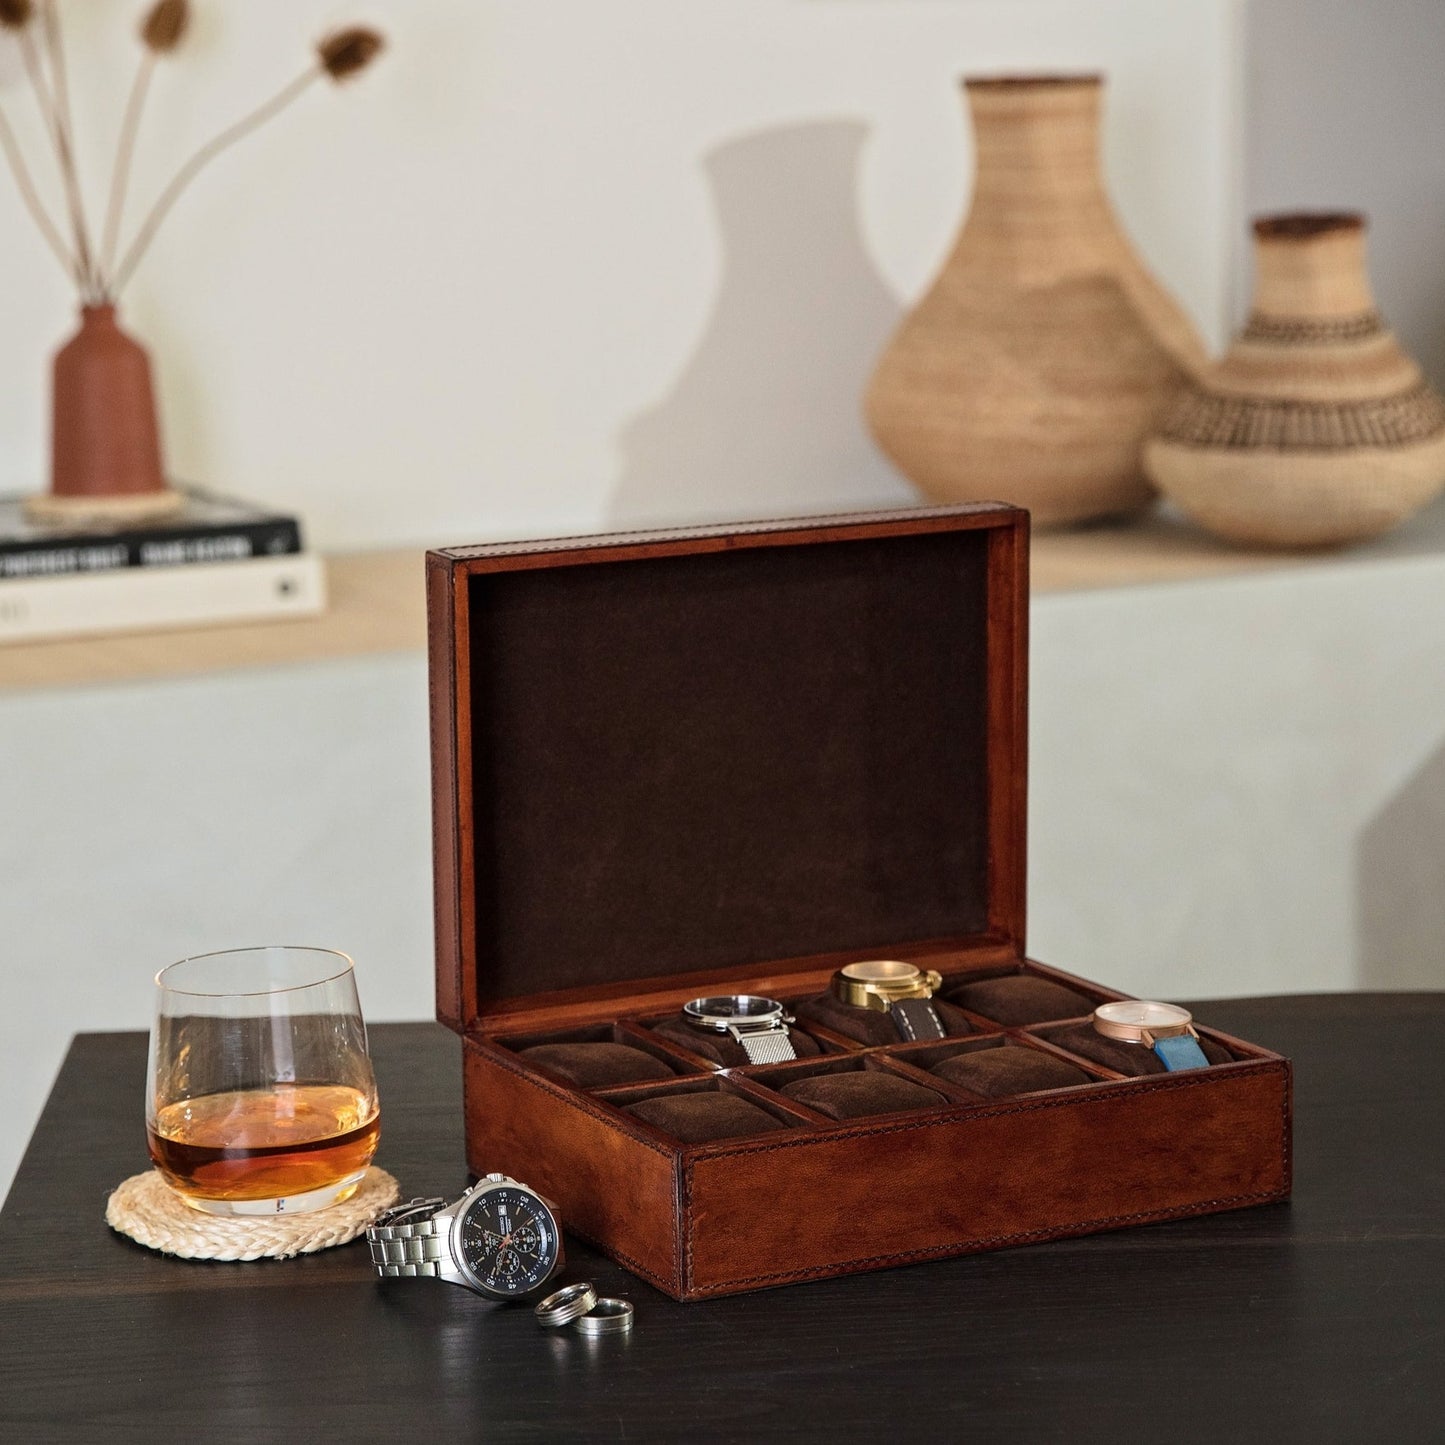 Large rectangular tan leather watch box with space for eight watches on removeable soft pillows. Personalise as a thoughtful gift for him for a 50th birthday or anniversary.